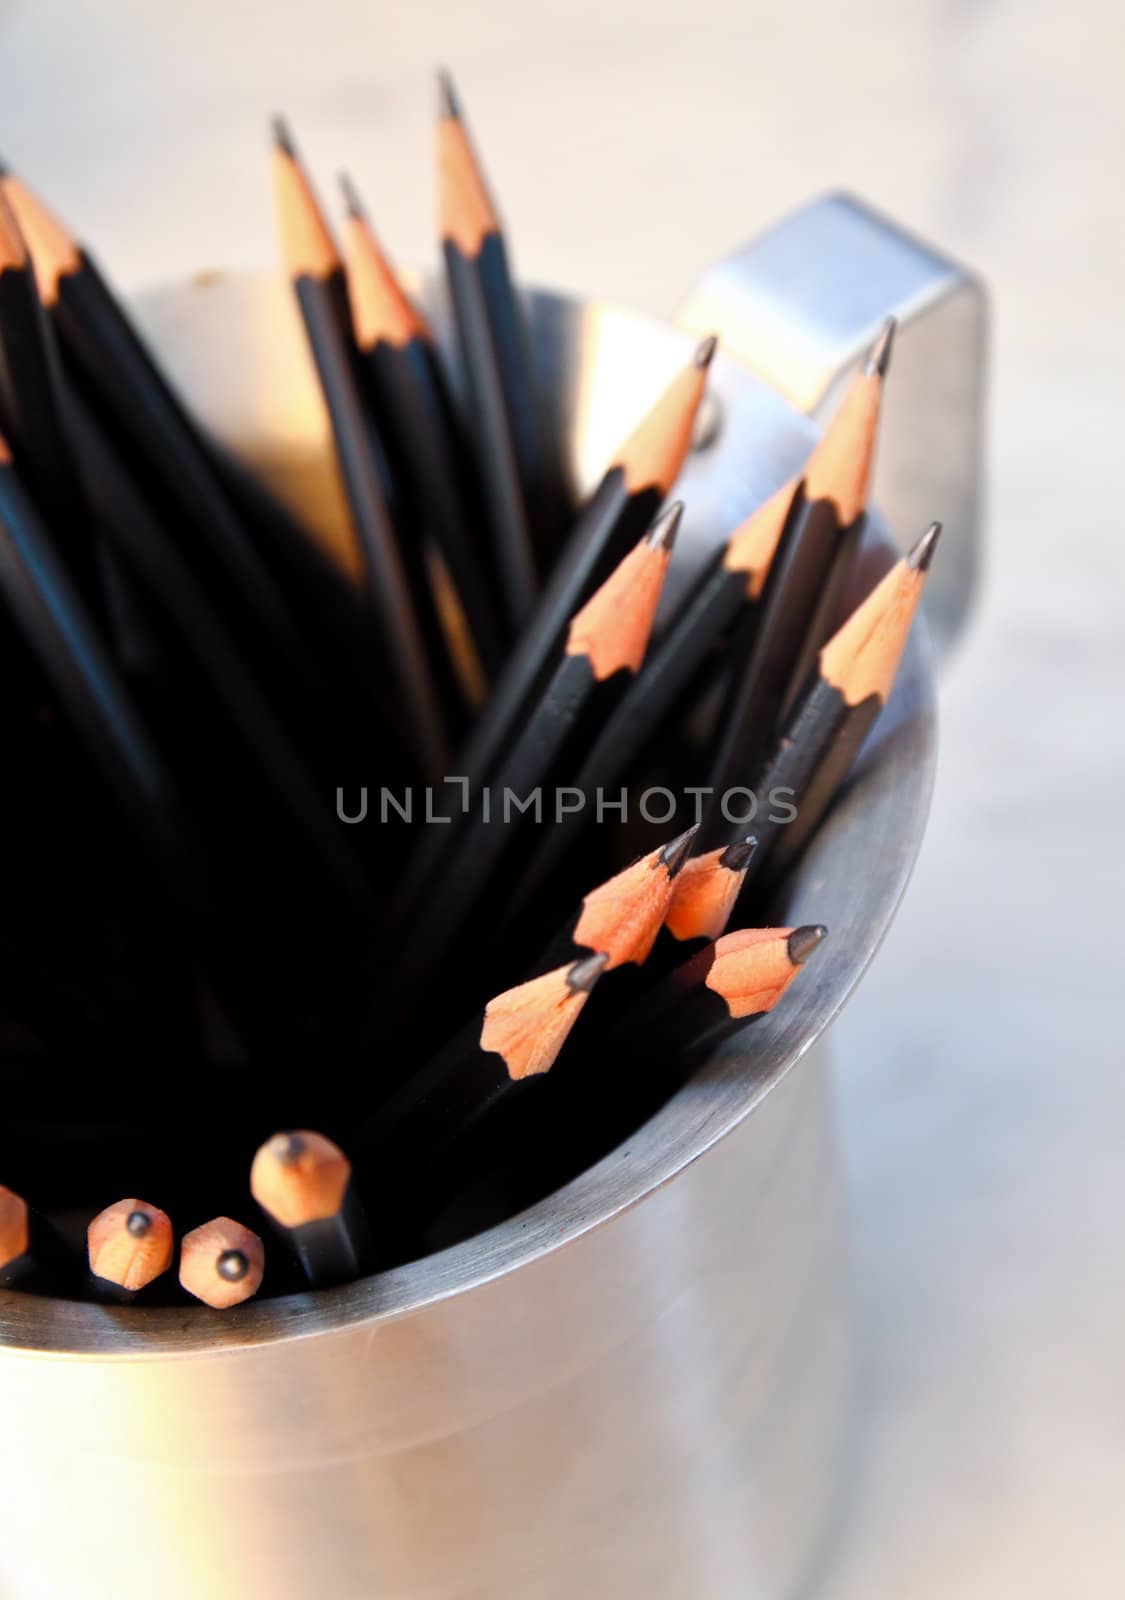 Bunch of pencils on cup